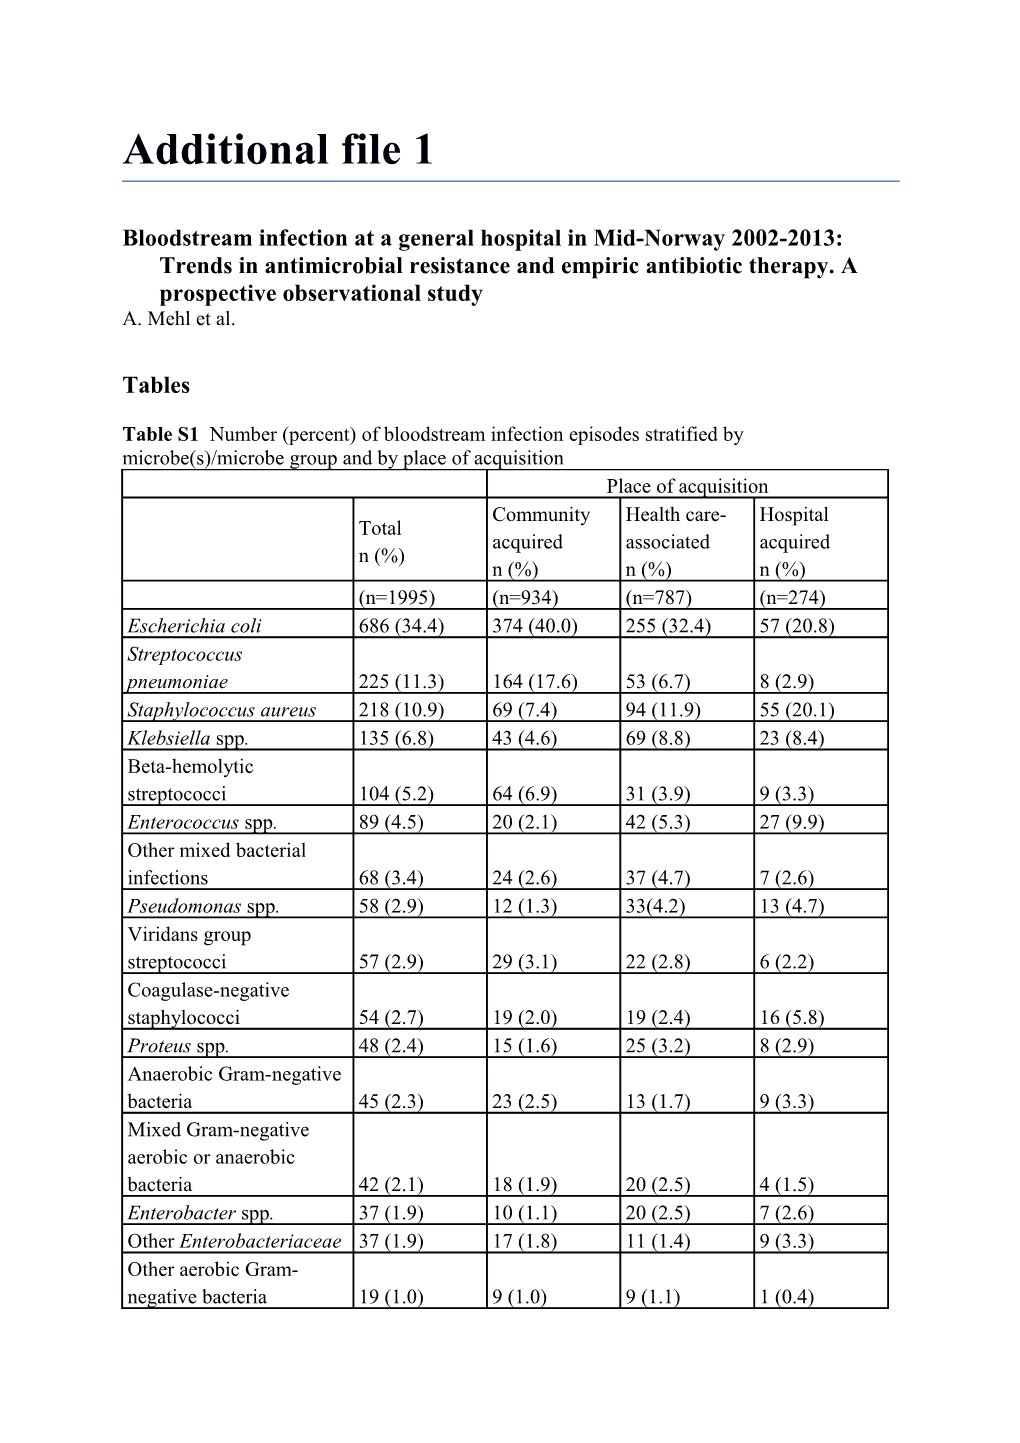 Bloodstream Infection at a Generalhospital in Mid-Norway 2002-2013: Trends in Antimicrobial